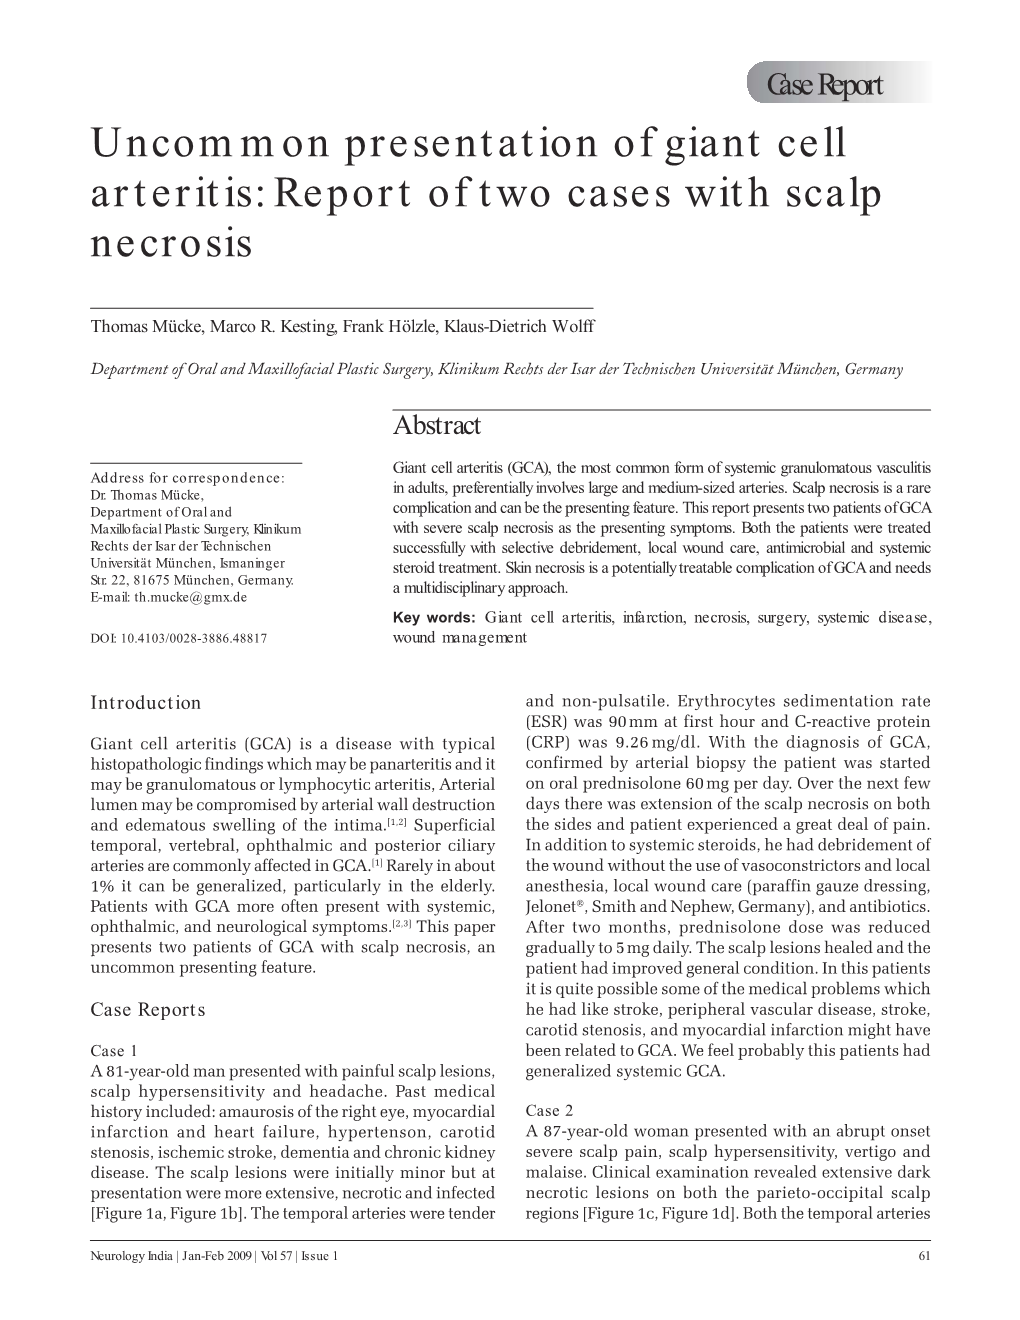 Uncommon Presentation of Giant Cell Arteritis: Report of Two Cases with Scalp Necrosis